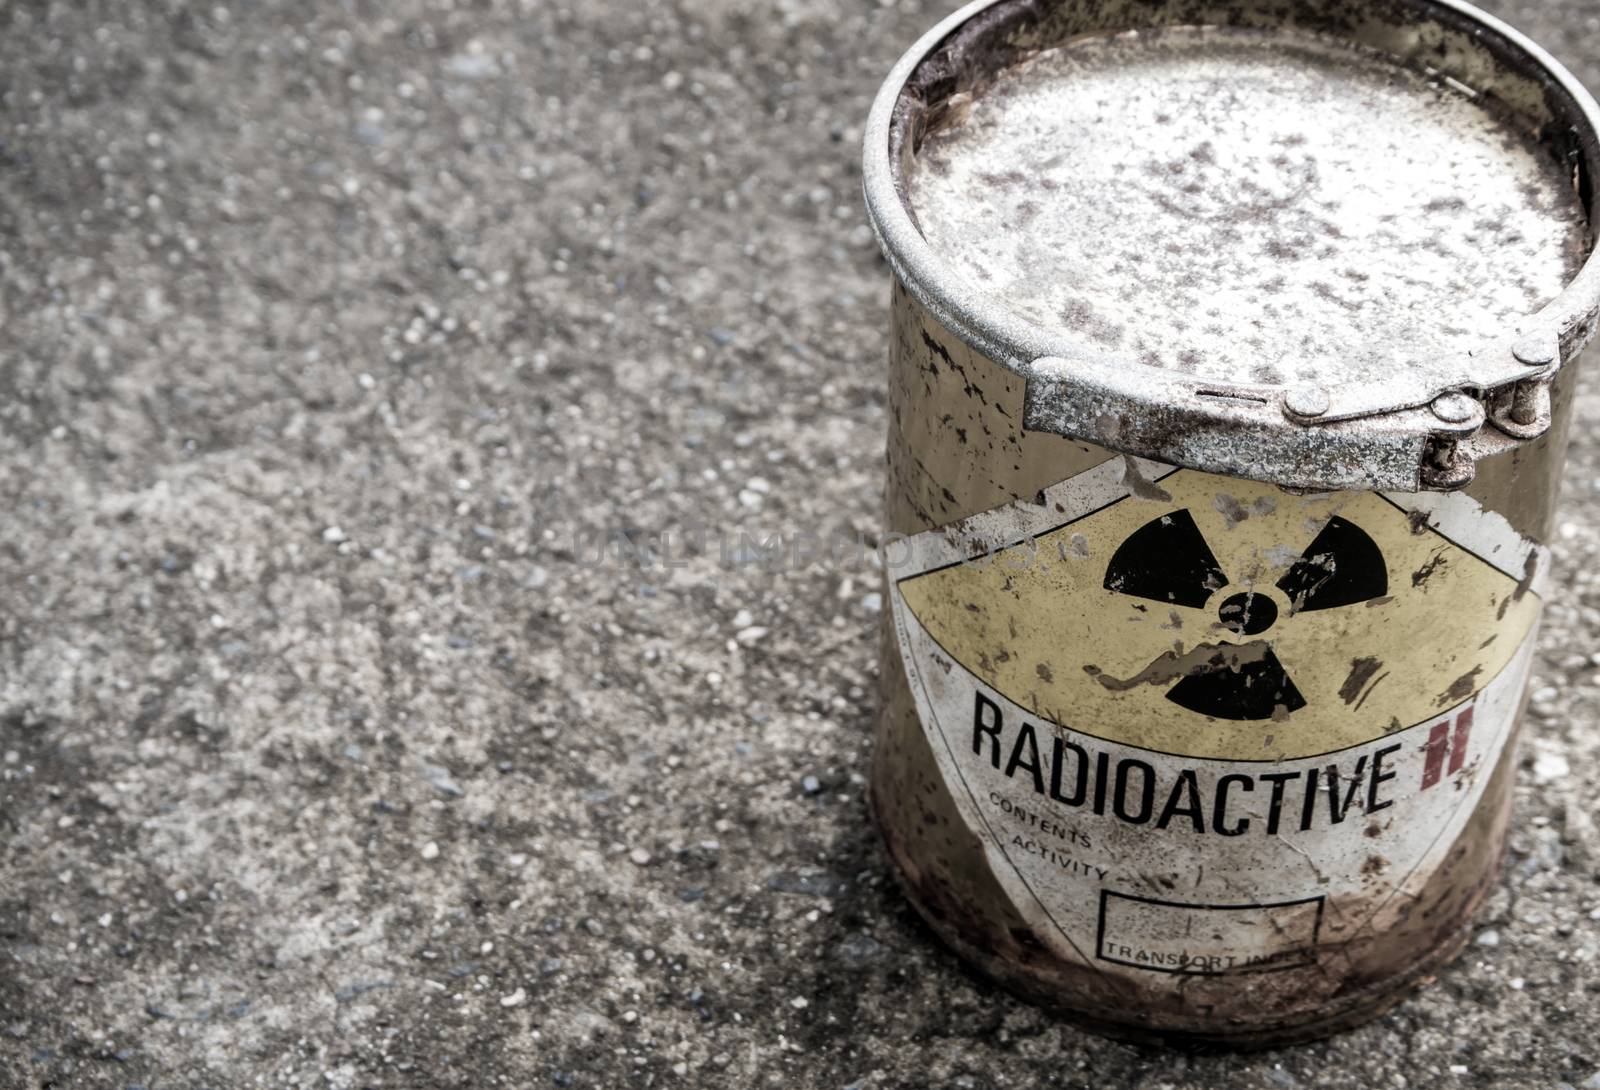 Old cylinder shape container of Radioactive material by Satakorn